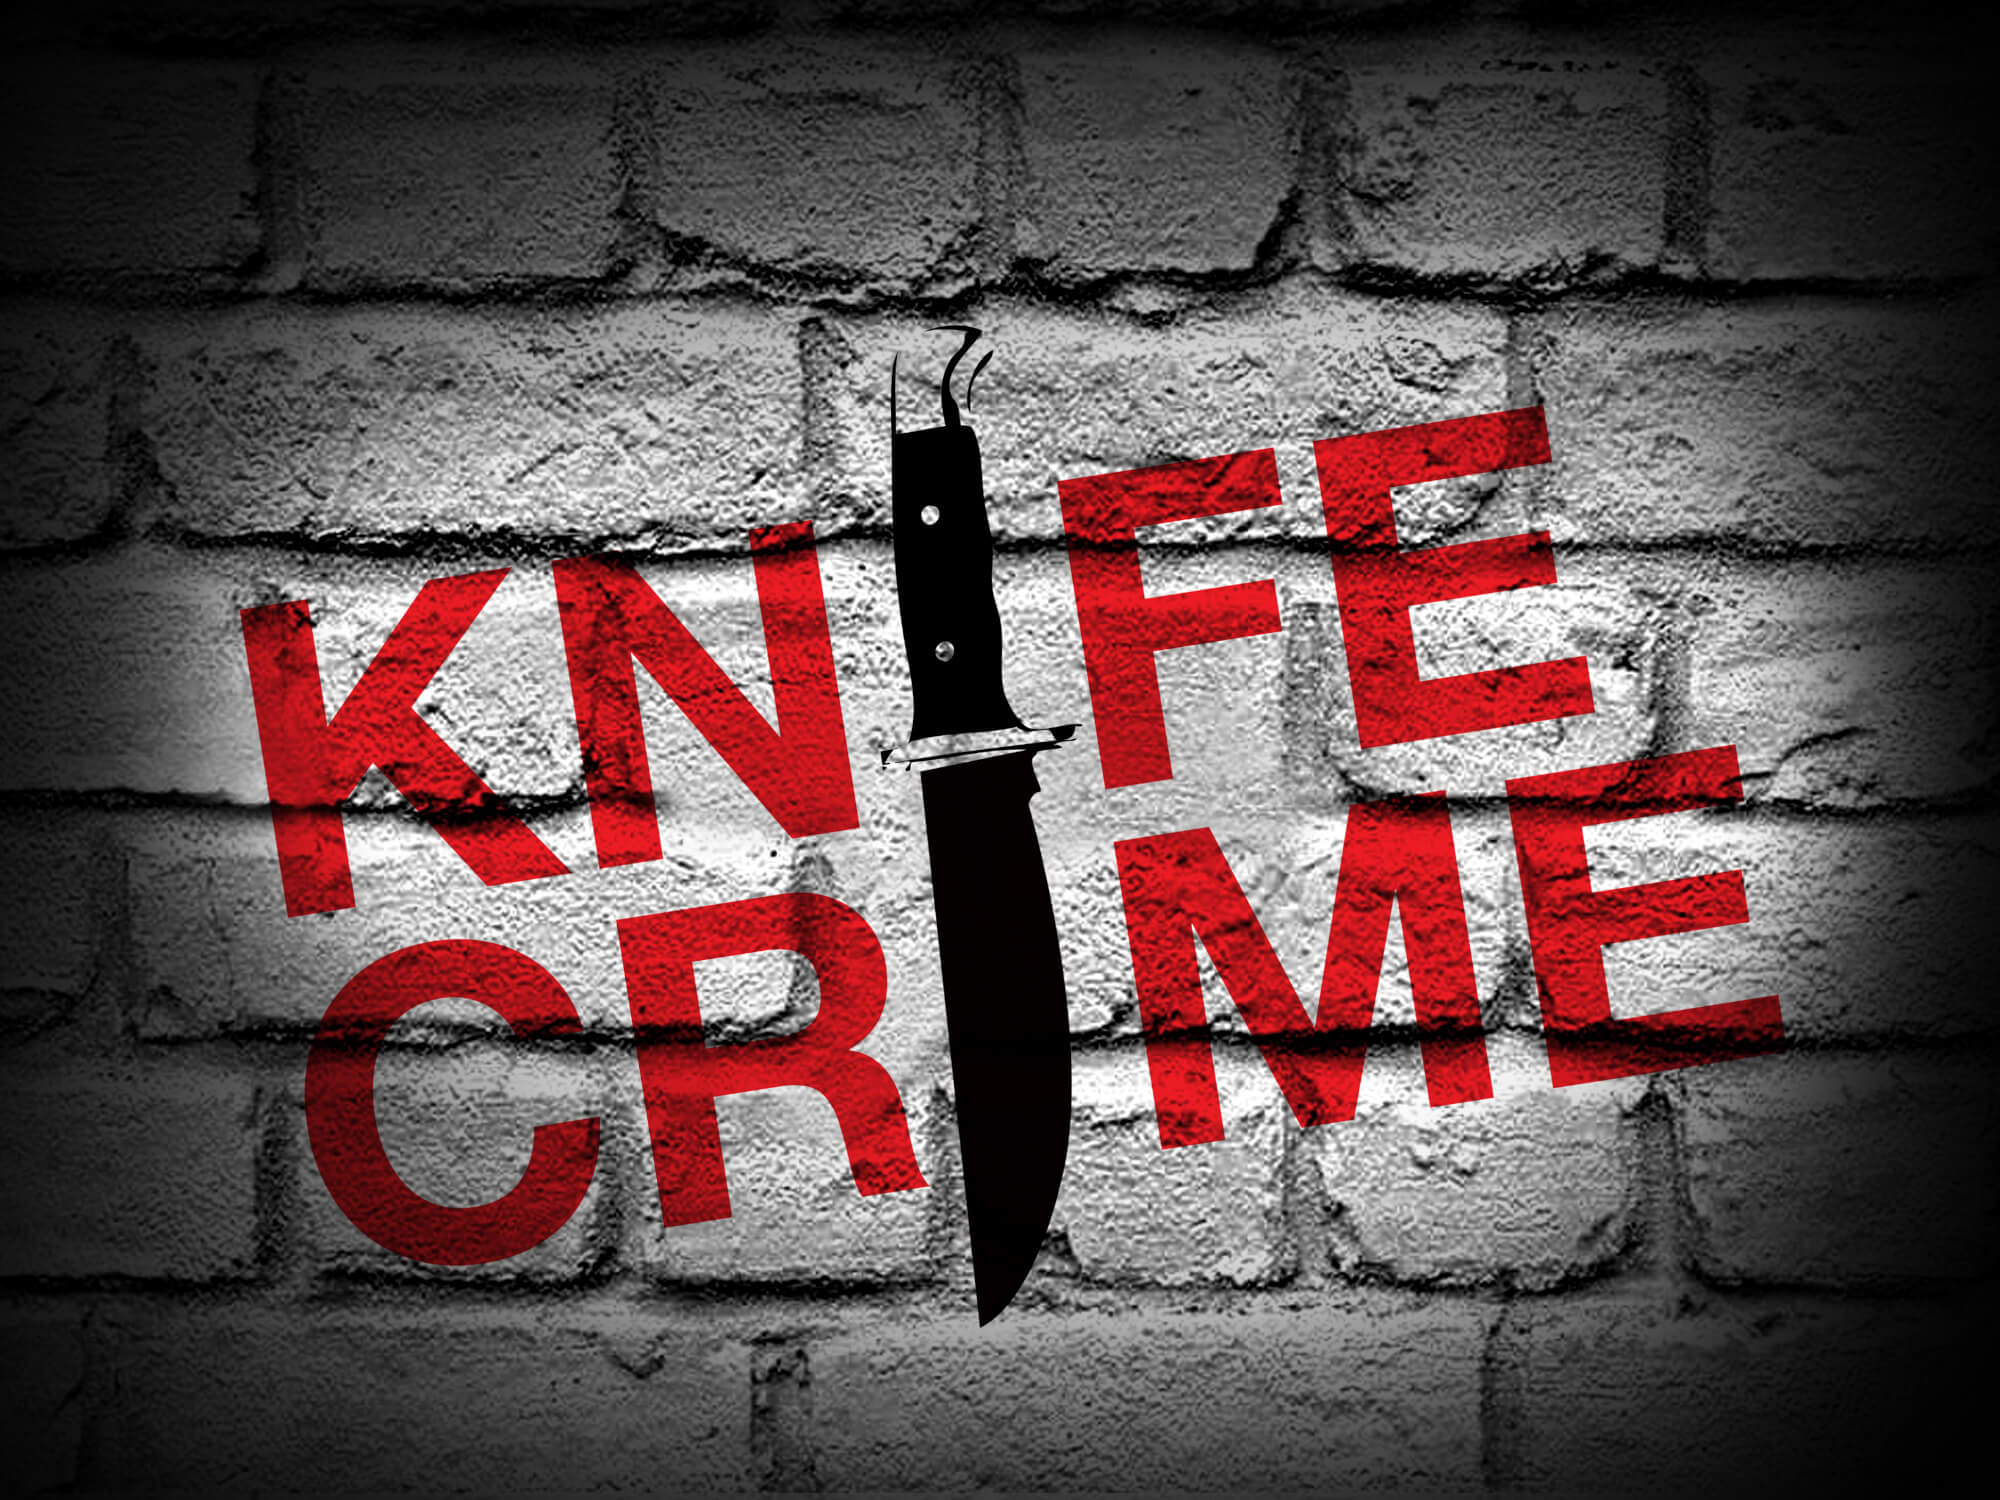 Rising Knife Crime Sparks Political Debate over Legislation and Solutions feature image